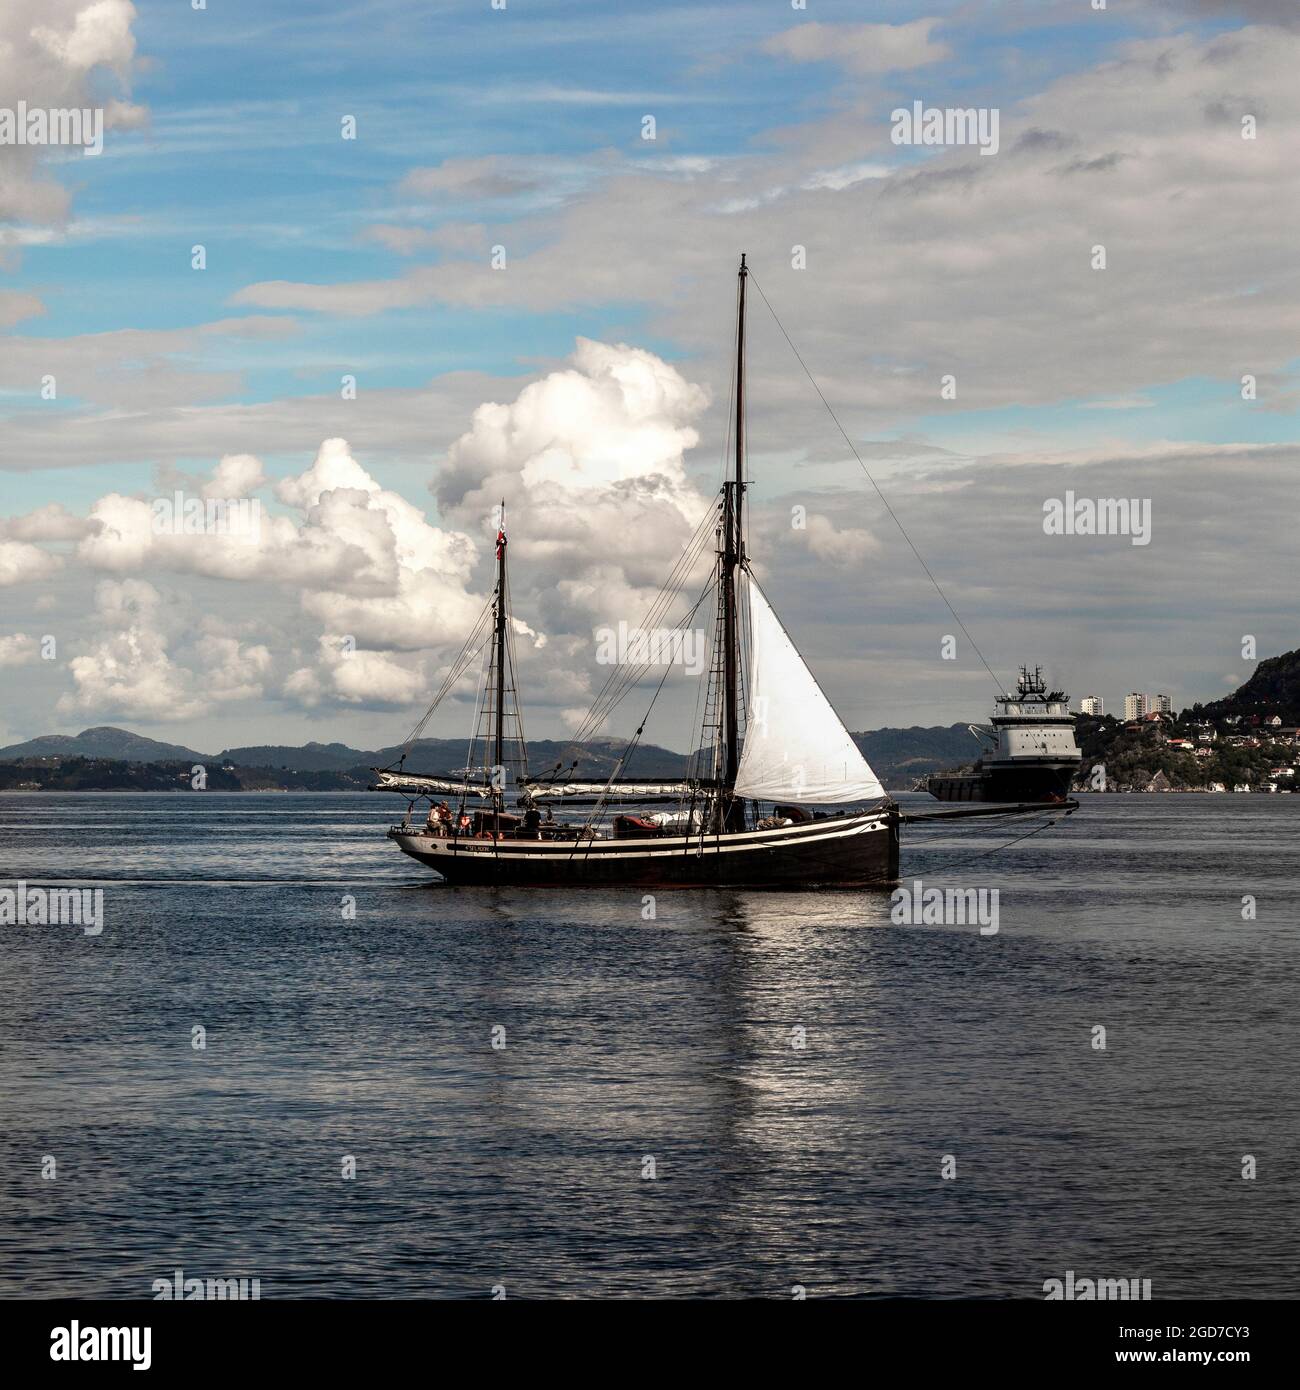 Veteran sailing vessel Seladon (built 1937) at Byfjorden, outside the port of Bergen, Norway.  Offshore supply vessel Island Chieftain in background Stock Photo